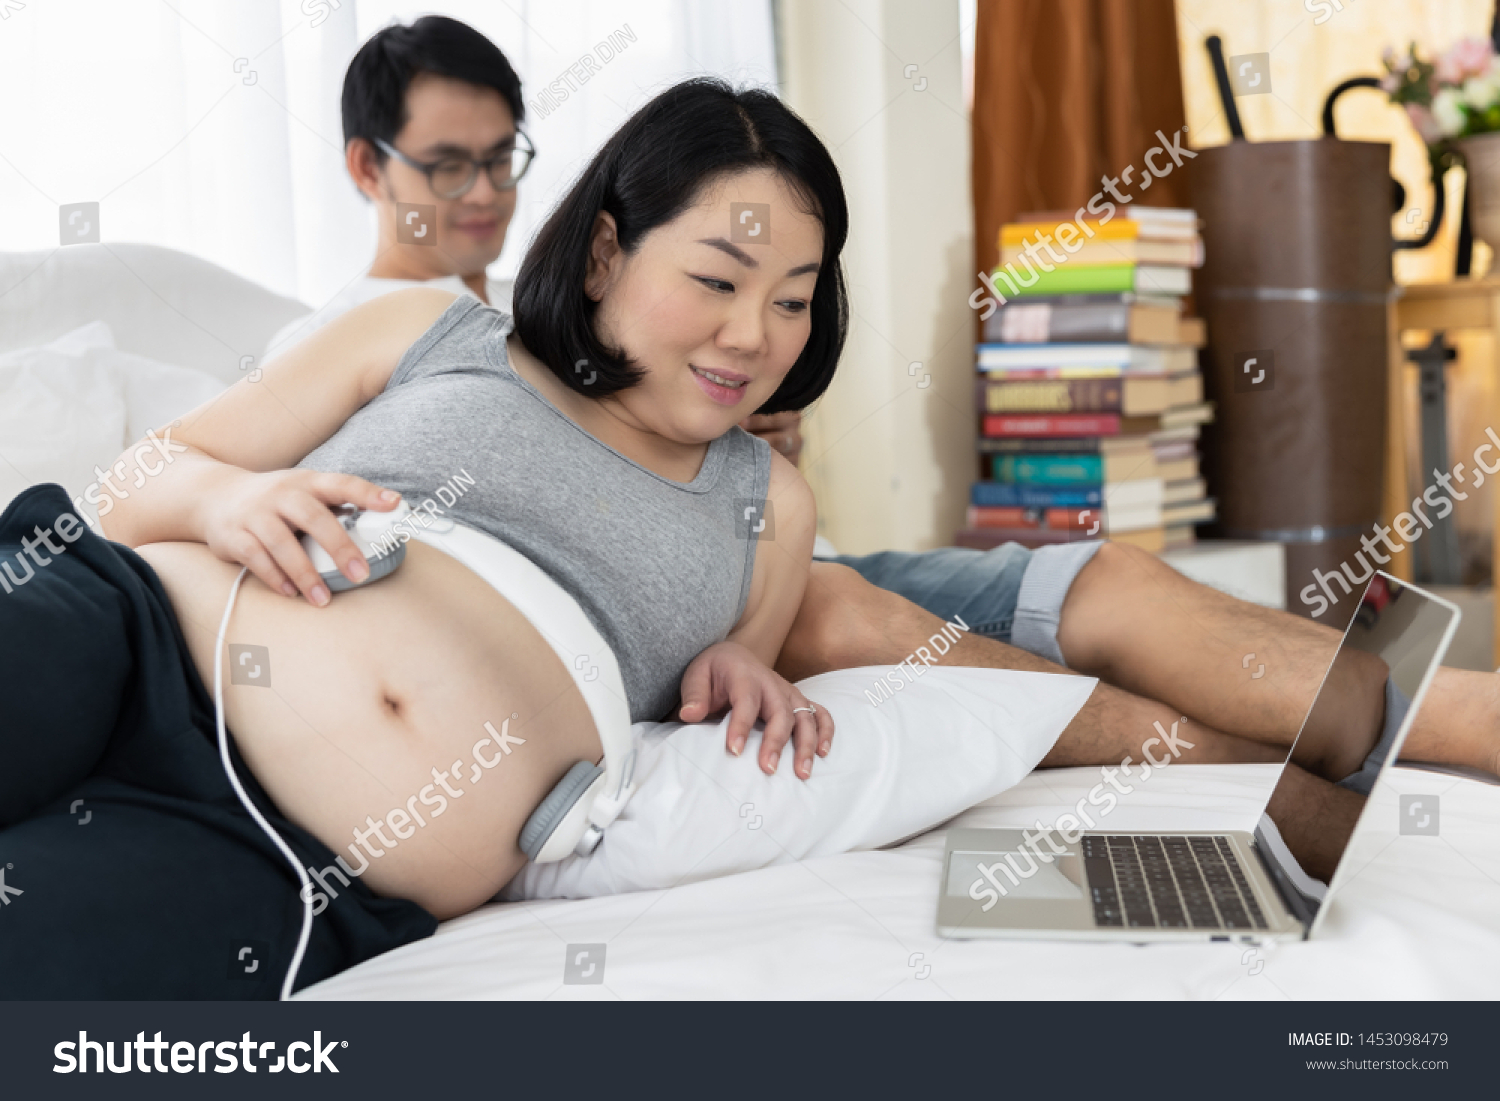 pregnant couples husband and wives resting on the bed in the bedroom and the wife opening the song on laptop let baby in the womb listen happy family baby love care concept #1453098479